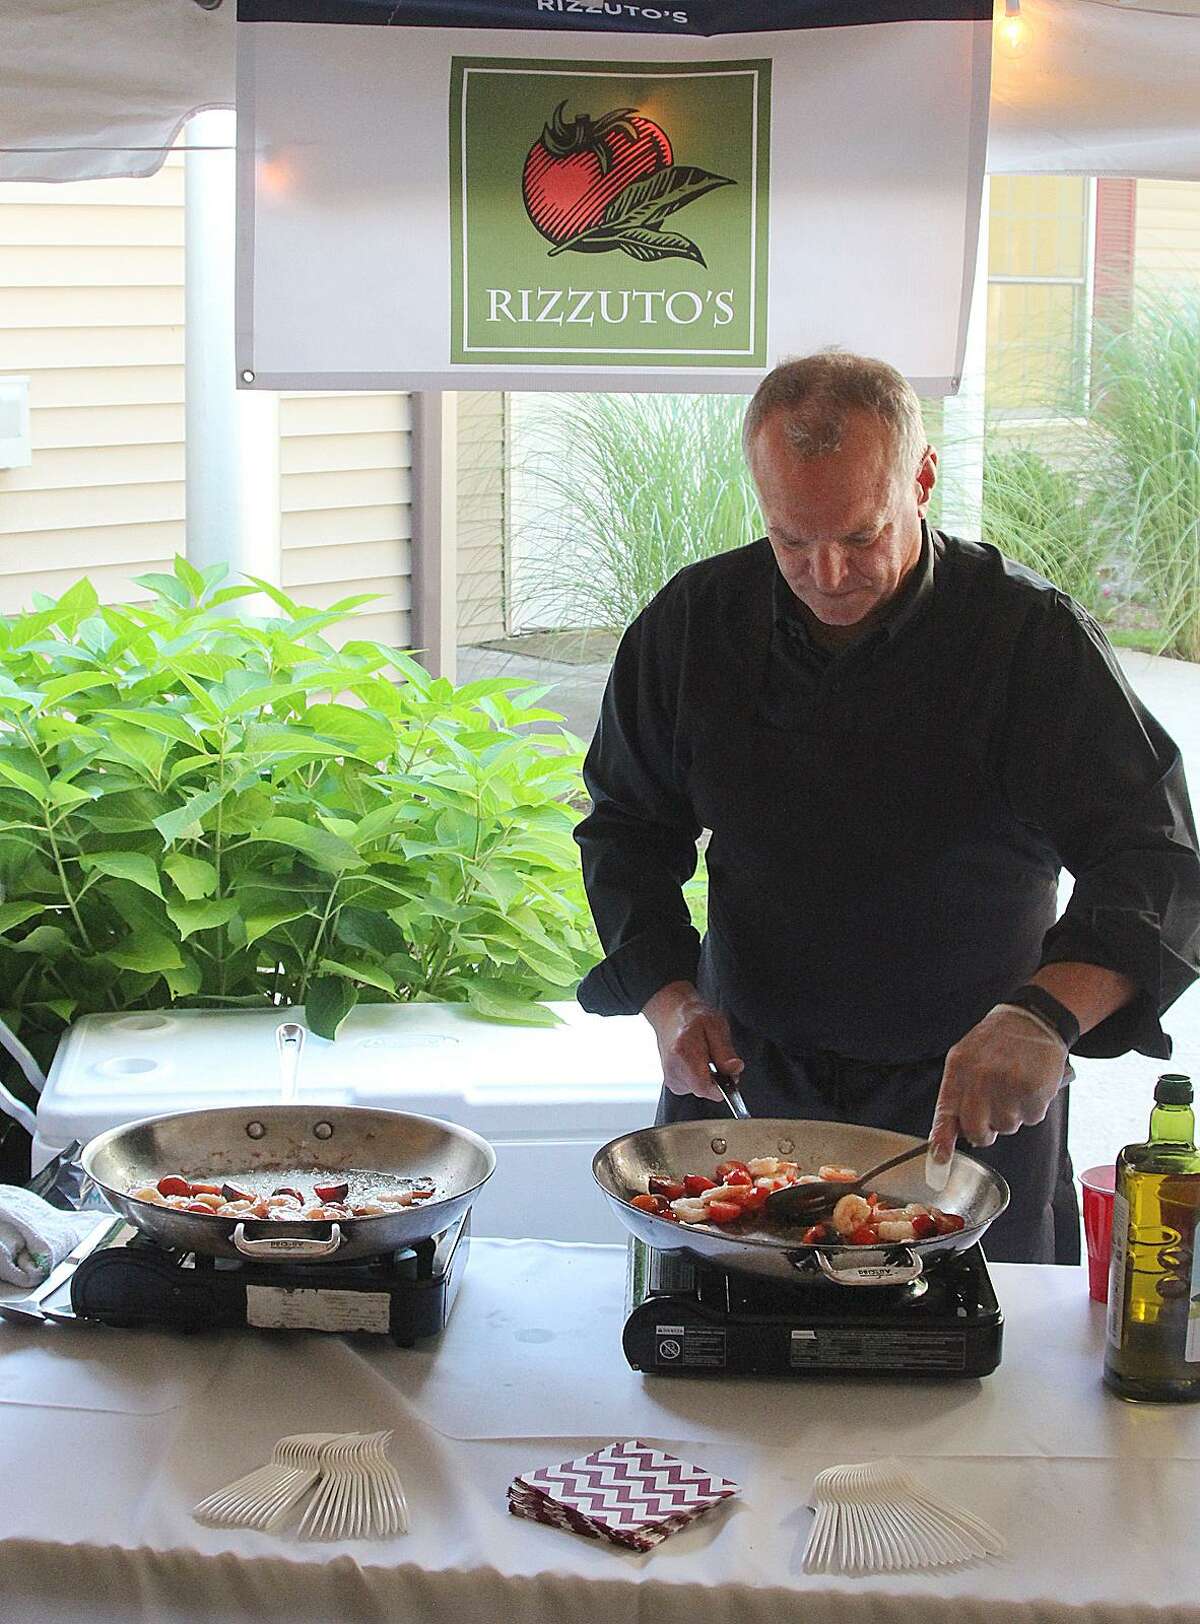 Bill Rizzuto of Rizzuto's served a variety of hot dishes at the Best of Bethel event held Wednesday, Aug. 23, 2017, at Bennett Memorial Park in Bethel, Conn.